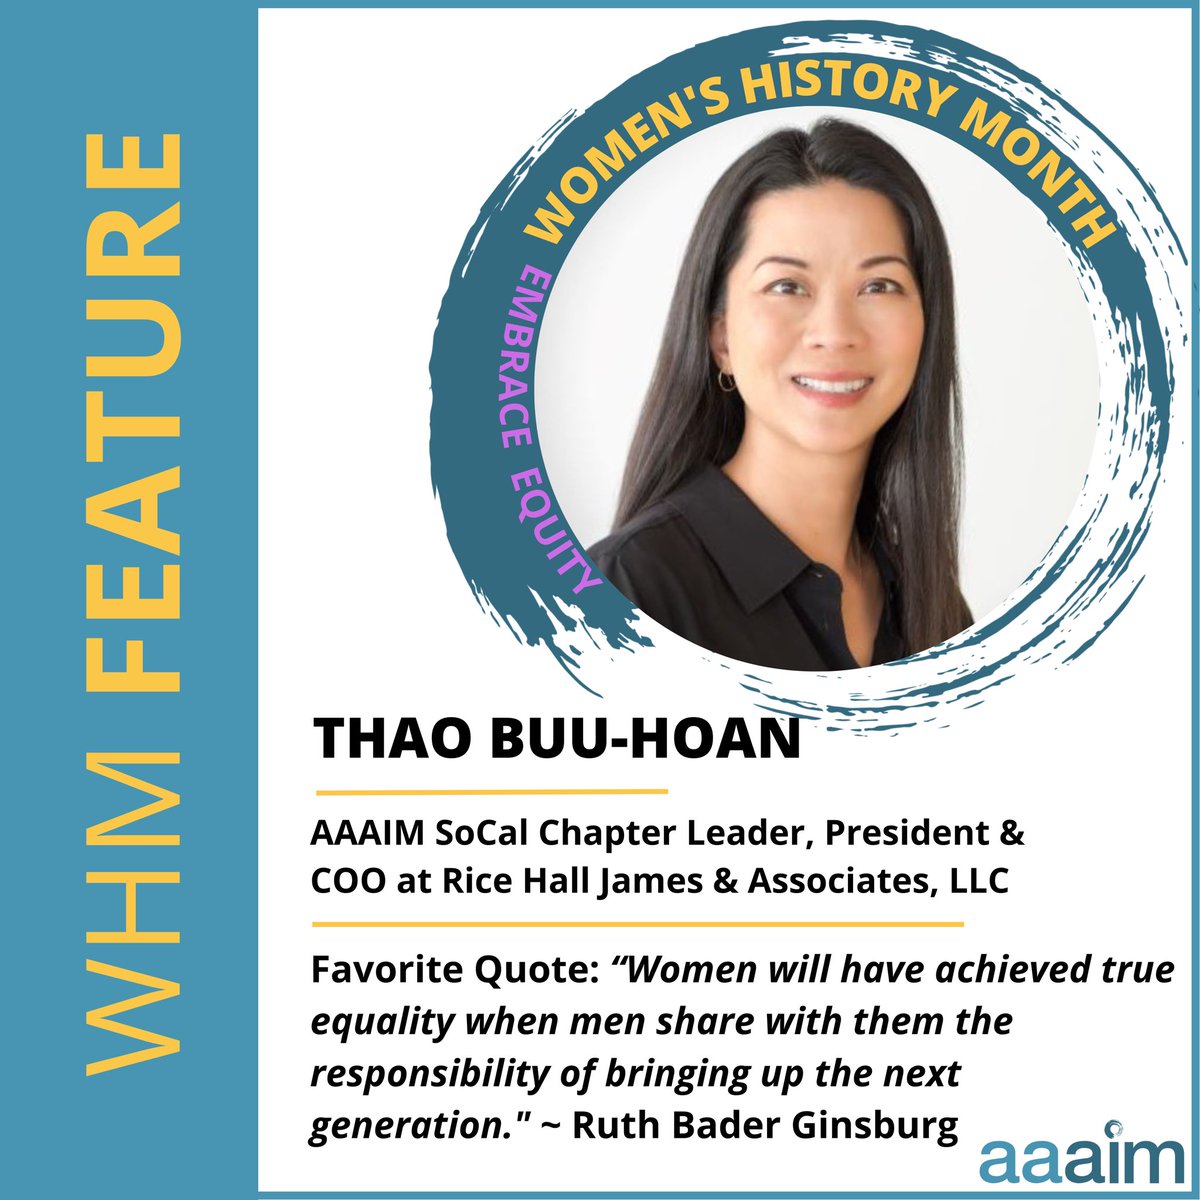 #AAAIM is proud to present 'WHM Feature' during #WomensHistoryMonth!

This week's feature: Thao Buu-Hoan, AAAIM SoCal Chapter Leader and President & COO at Rice Hall James & Associates, LLC.

#WomensHistoryMonth2023 #WomenInHistory #HerStory #AAPI #AsianAmericanWomen #AAPIWomen